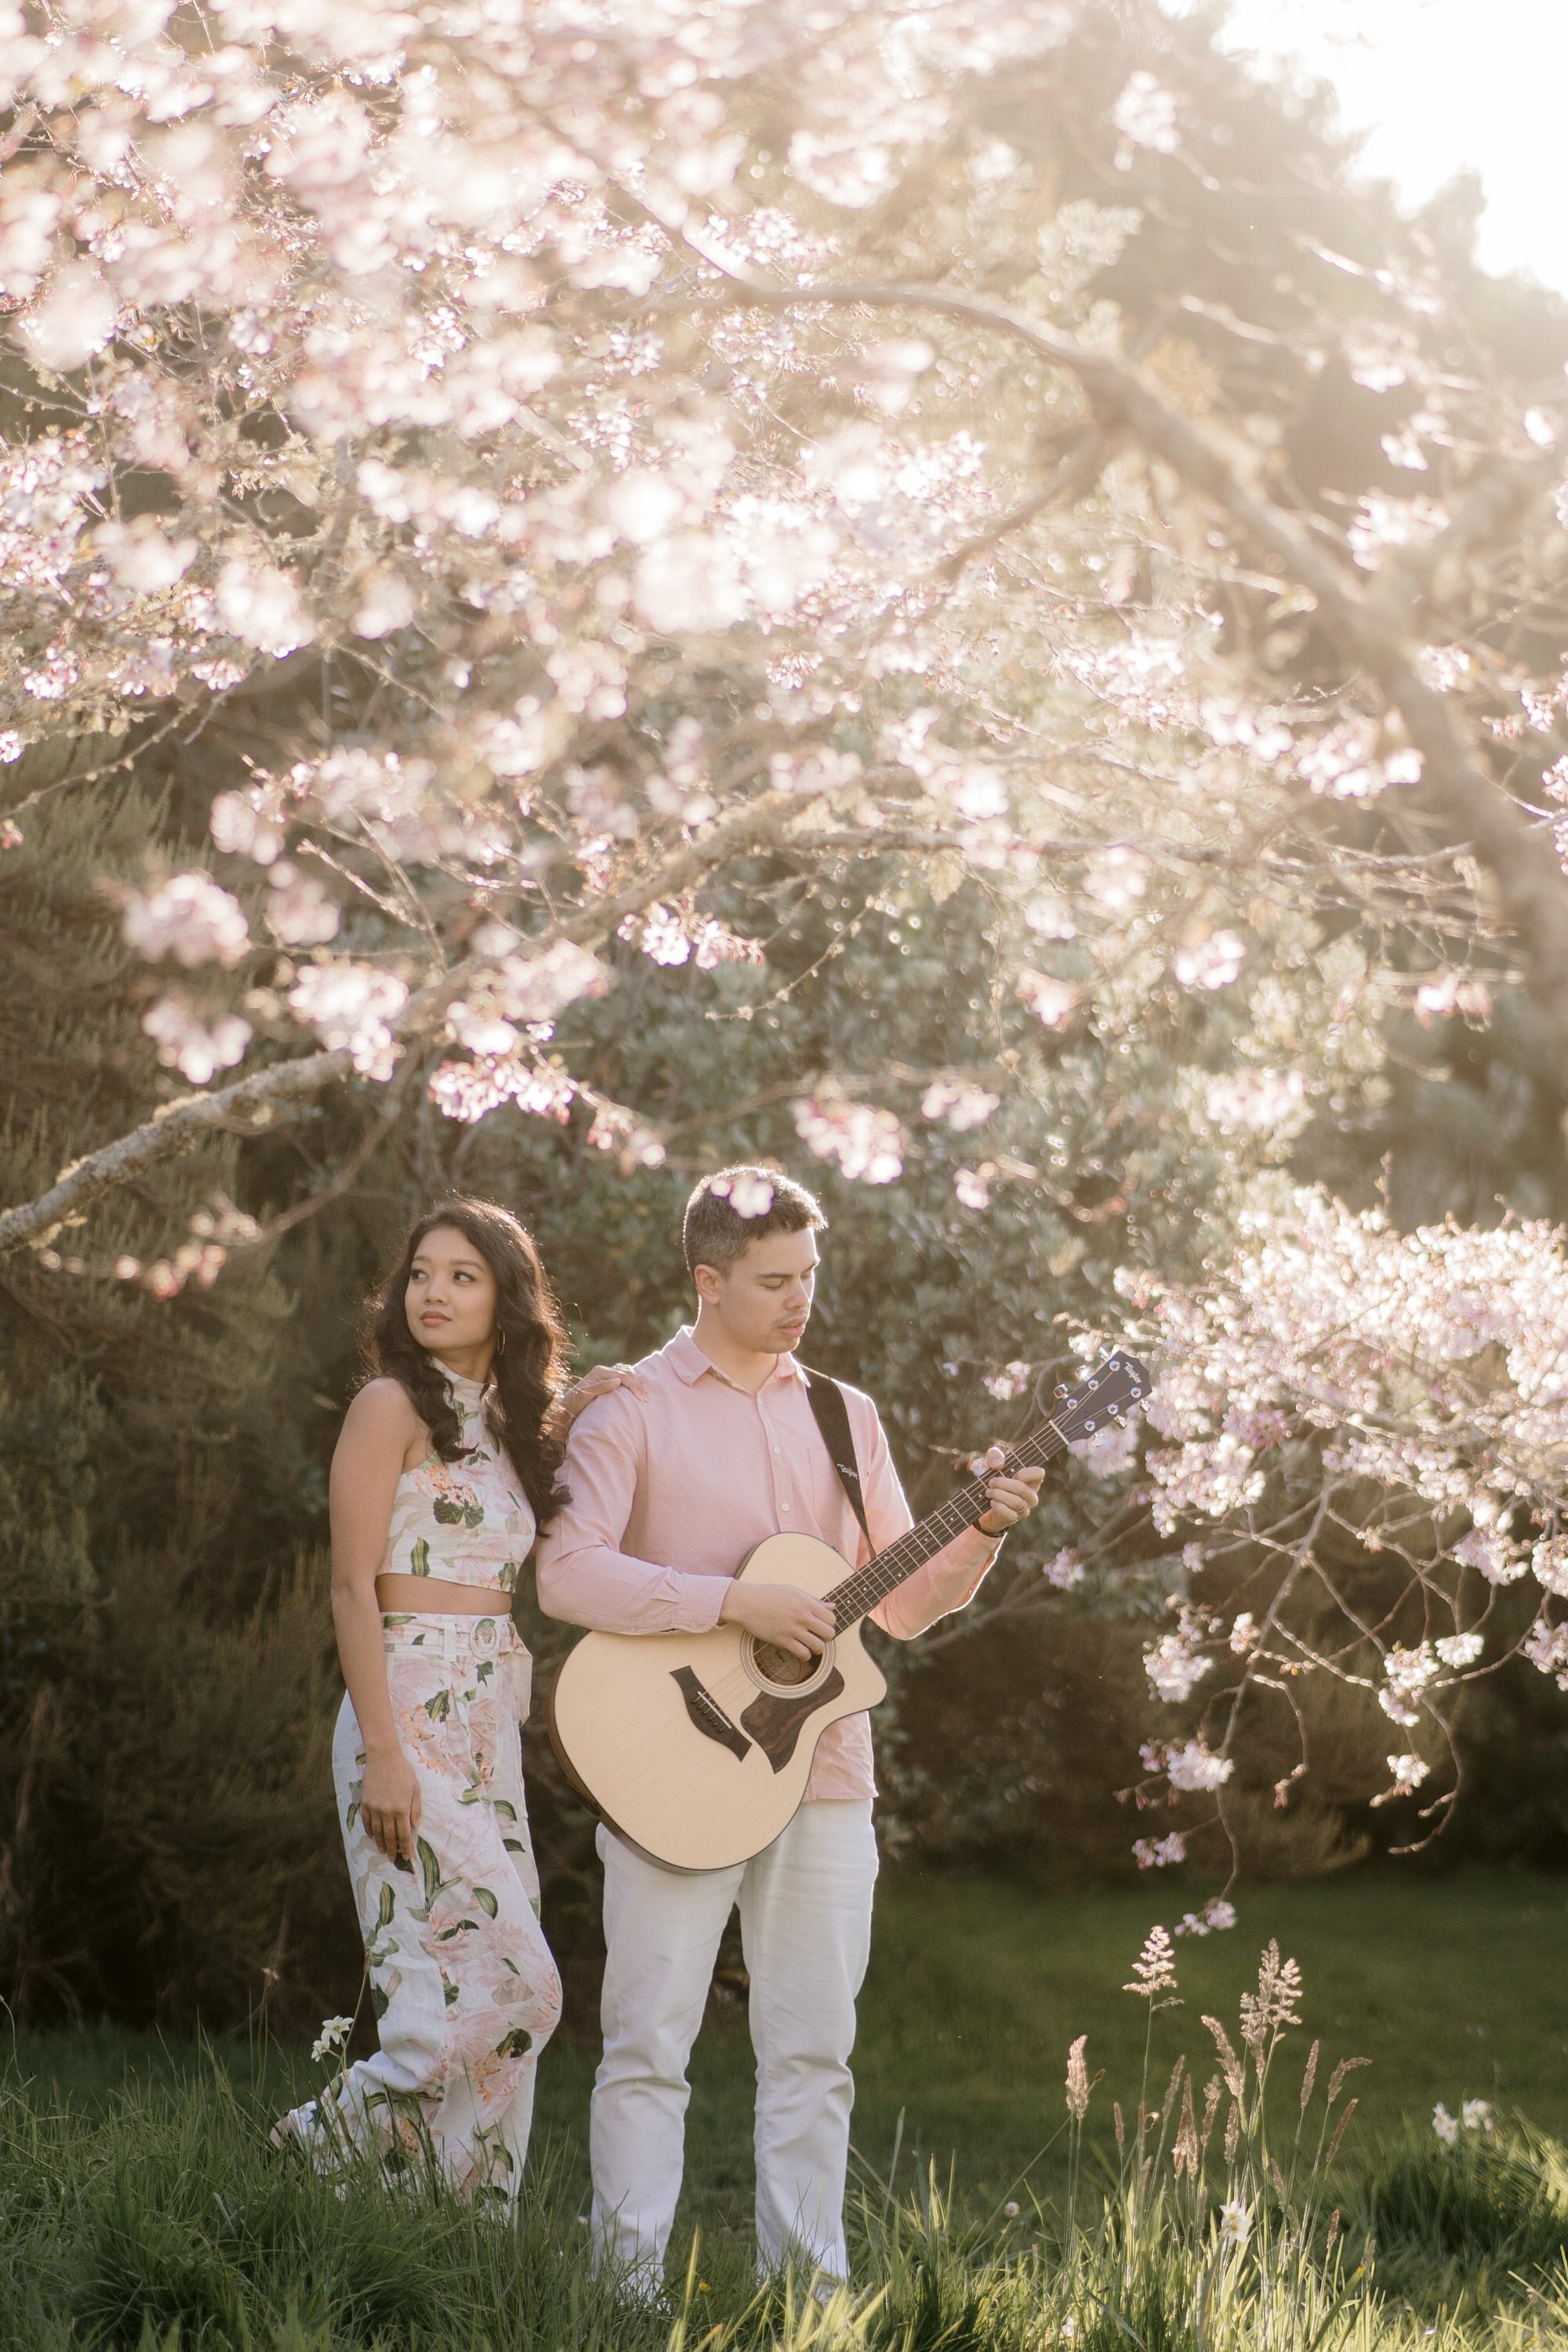 nate-and-thea-singers-duo-2023-top-auckland-wedding-phtographer-photography-videography-film-new-zealand-NZ-best-band-cherry-blossom-botanical-garden-engagement-elopement-dear-white-productions (59).jpg